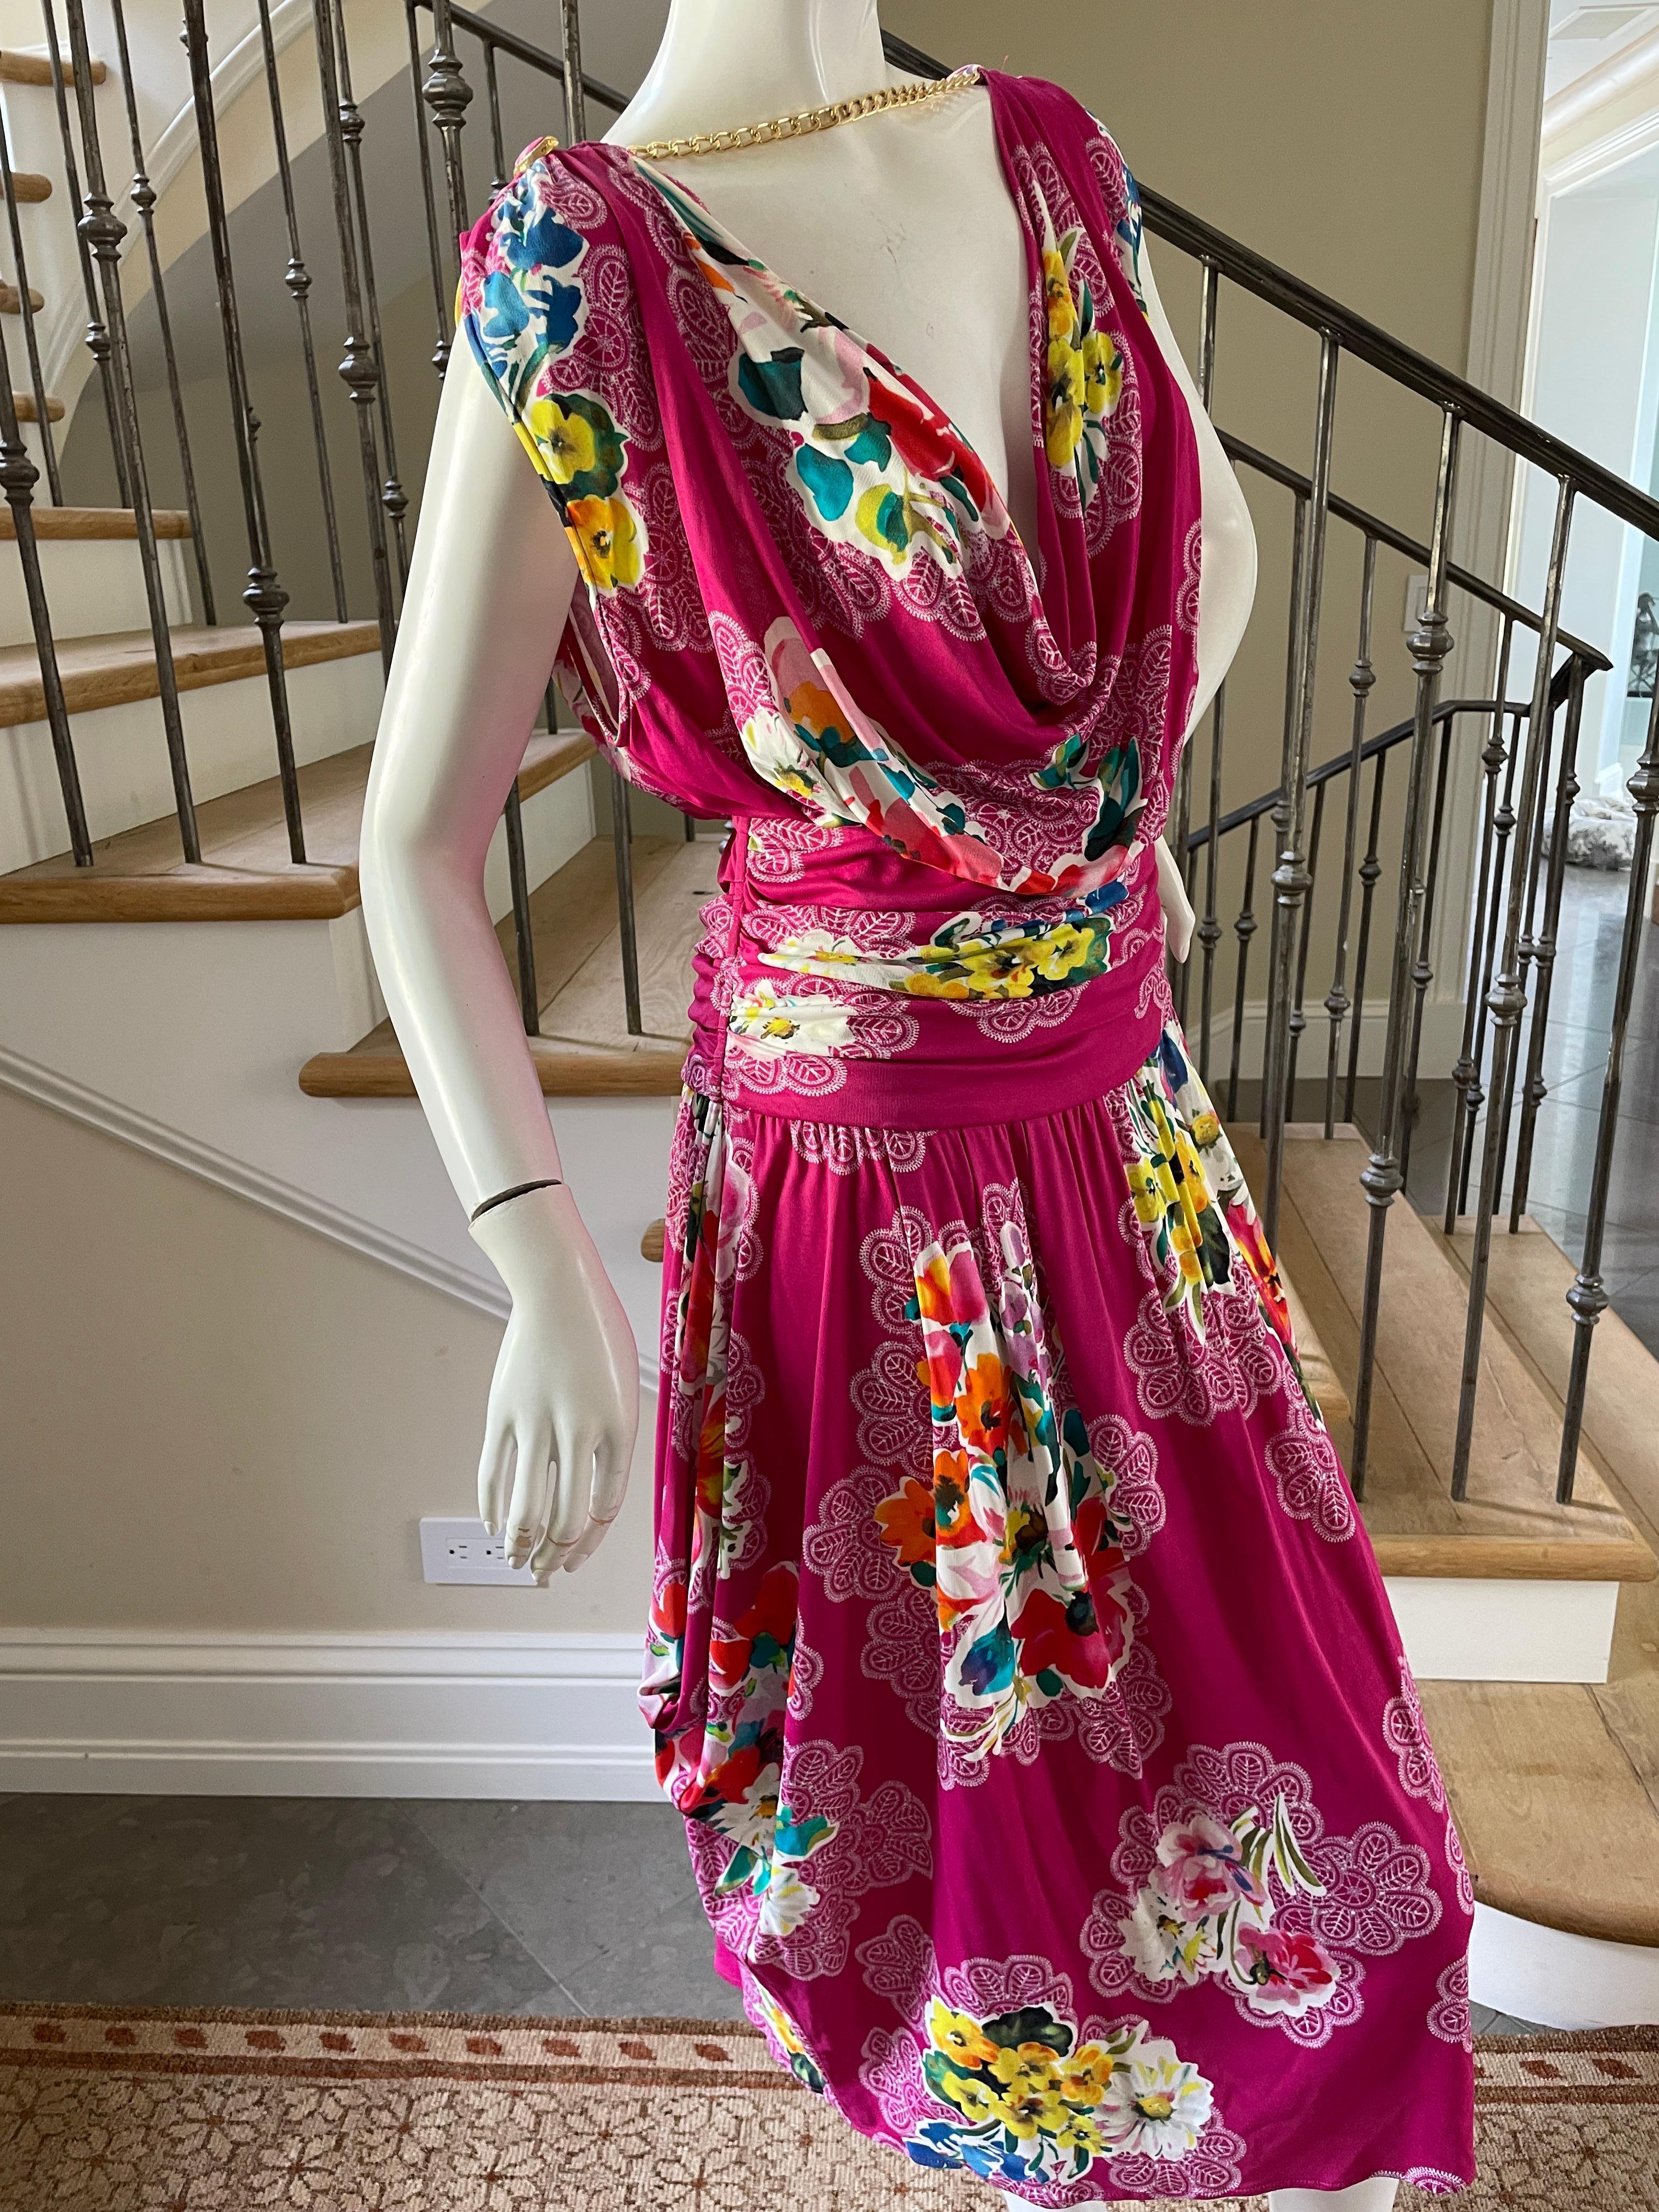 Dolce & Gabbana for D&G Vintage Floral Dress with Draped Gold Chain Details 48 For Sale 2